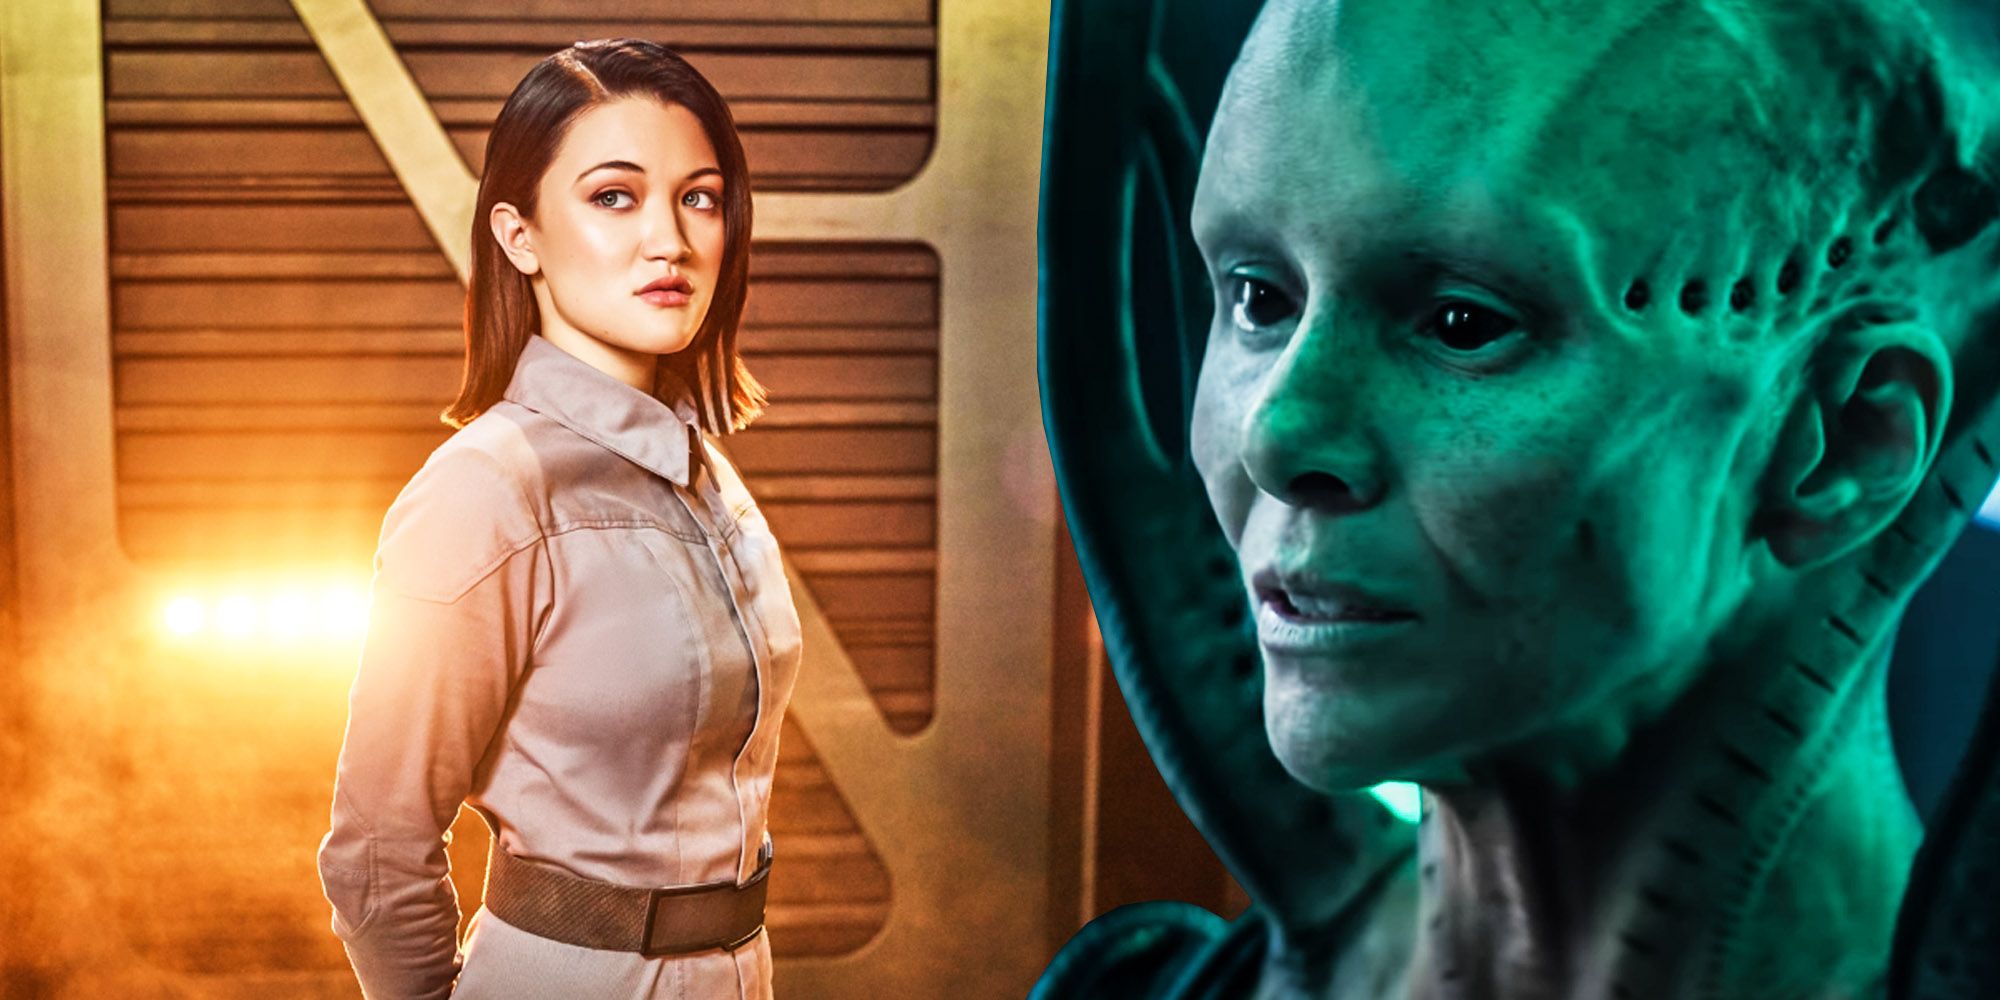 Star Trek Picard Time Travel Creates A Borg Queen and android plot hole soji